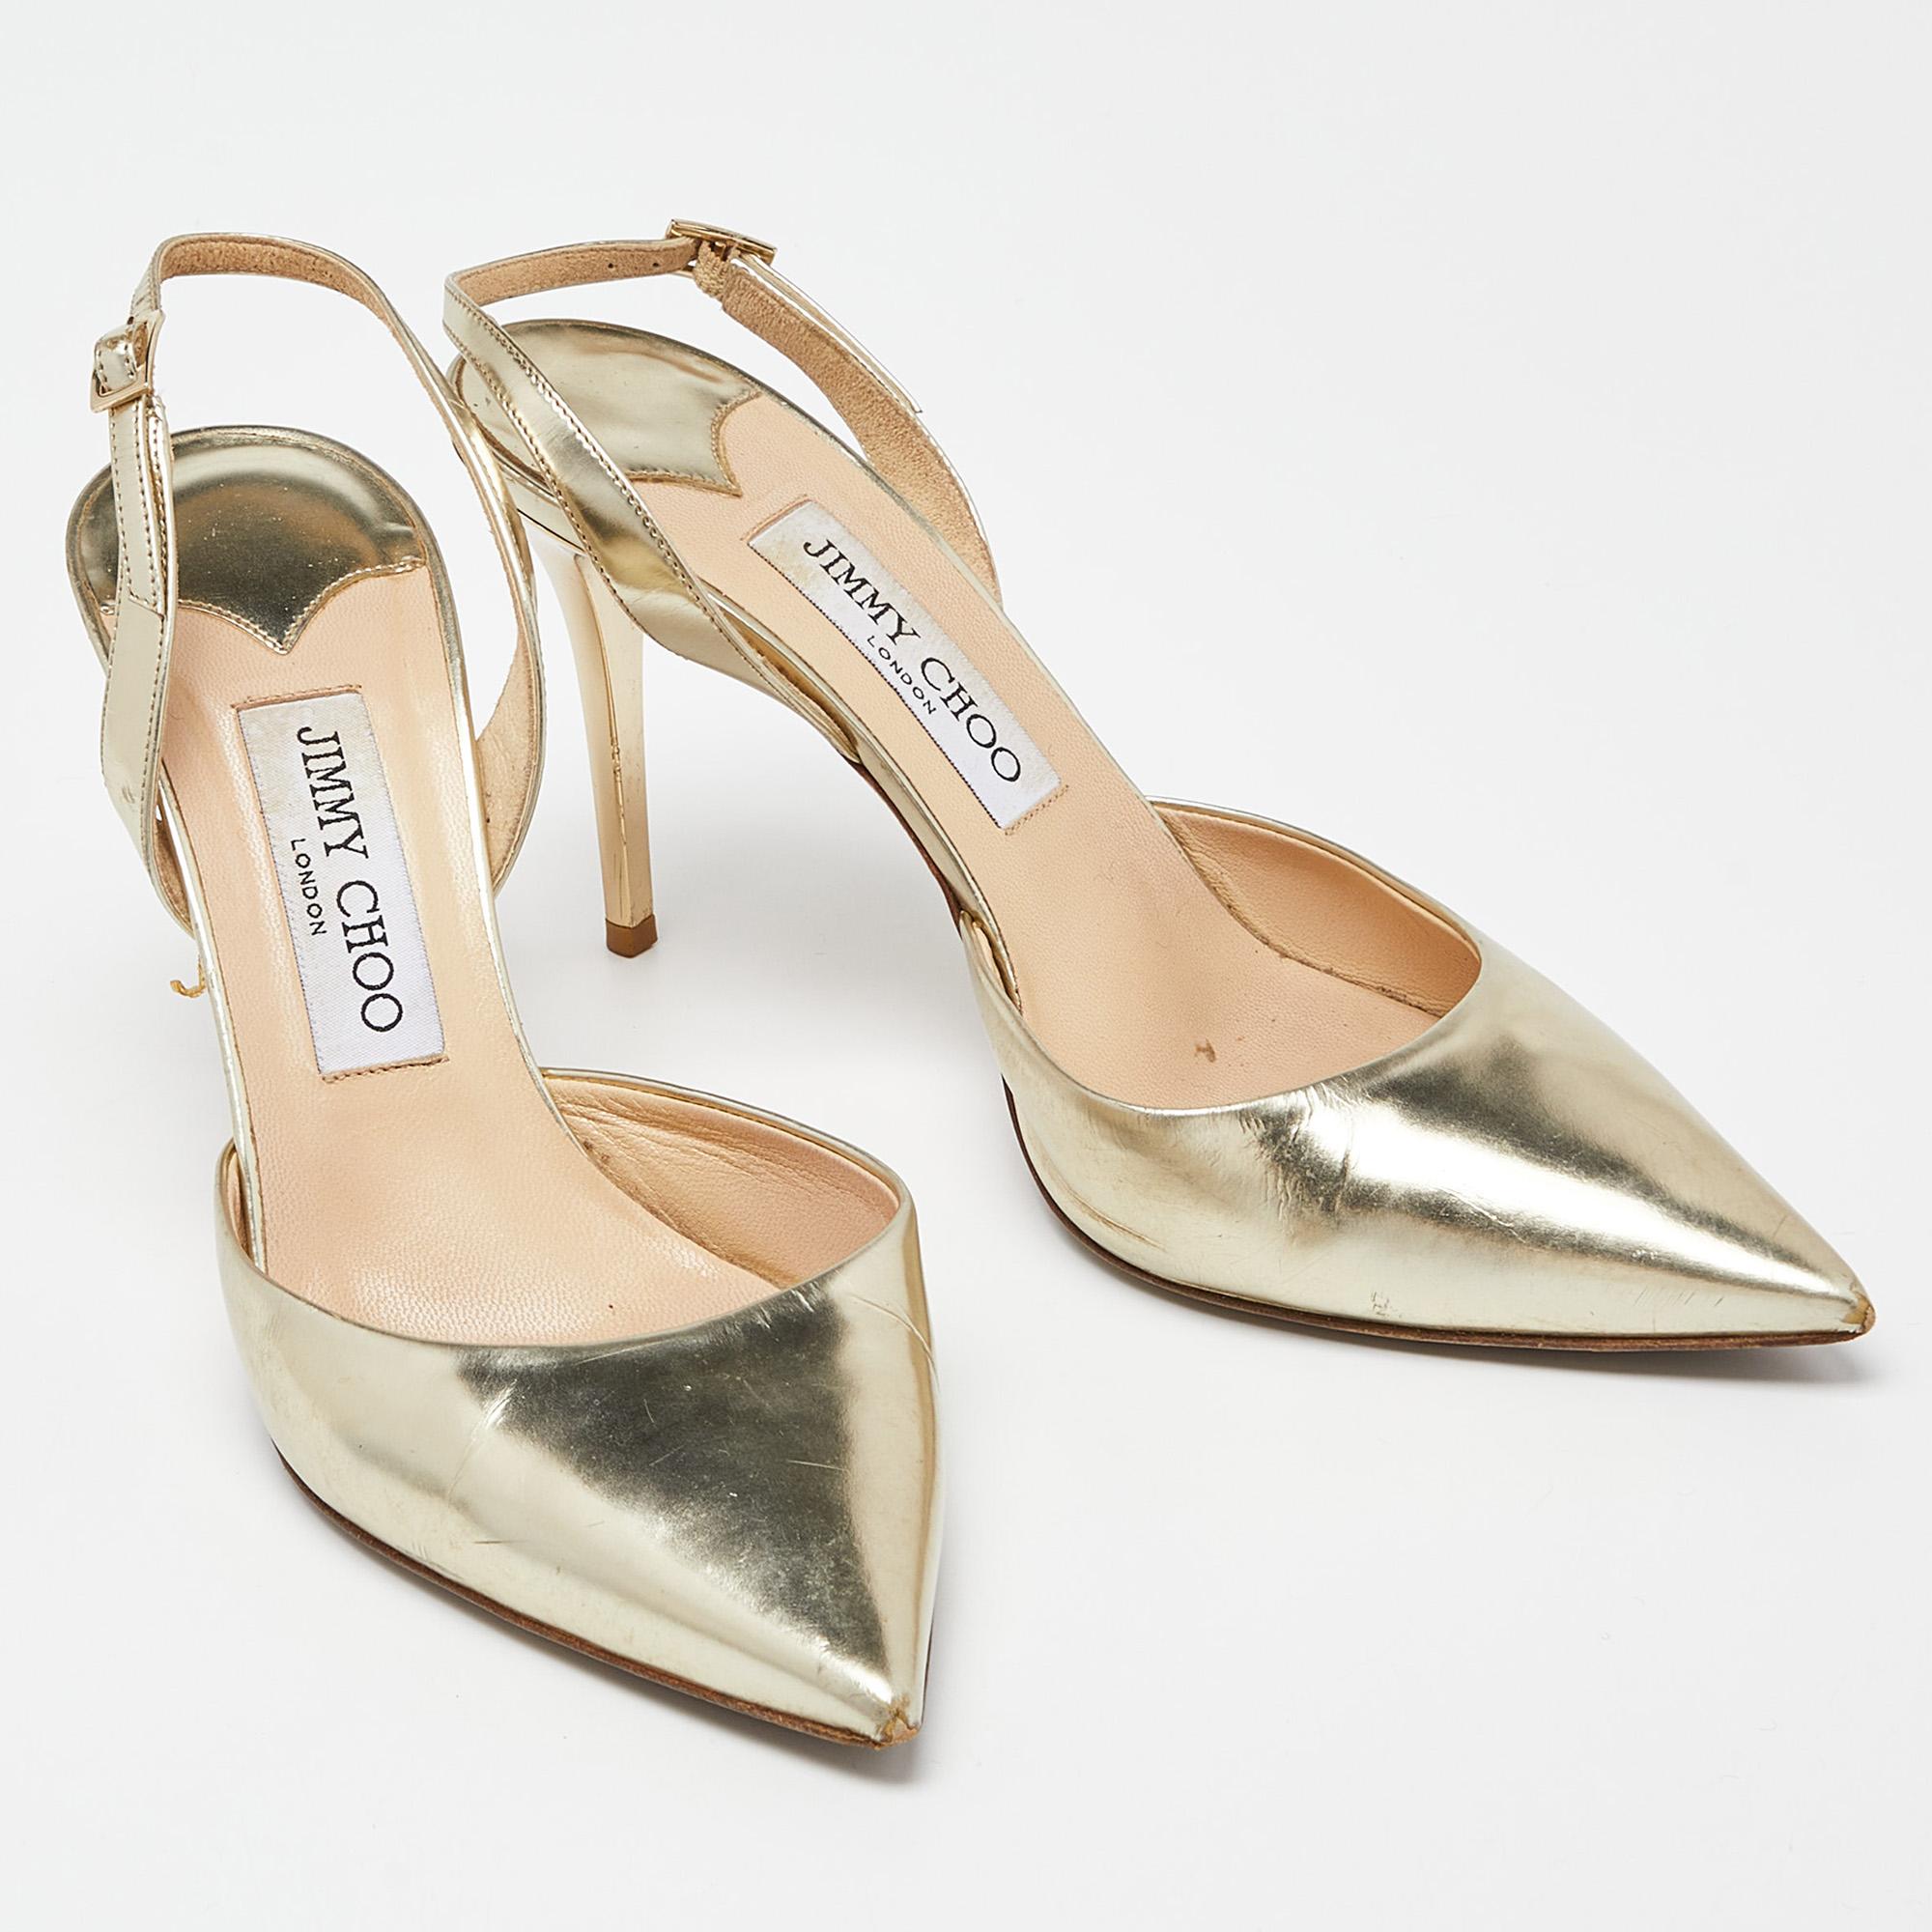 Jimmy Choo Gold Mirror Leather Pointed Toe Slingback Sandals Size 38.5 In Good Condition For Sale In Dubai, Al Qouz 2